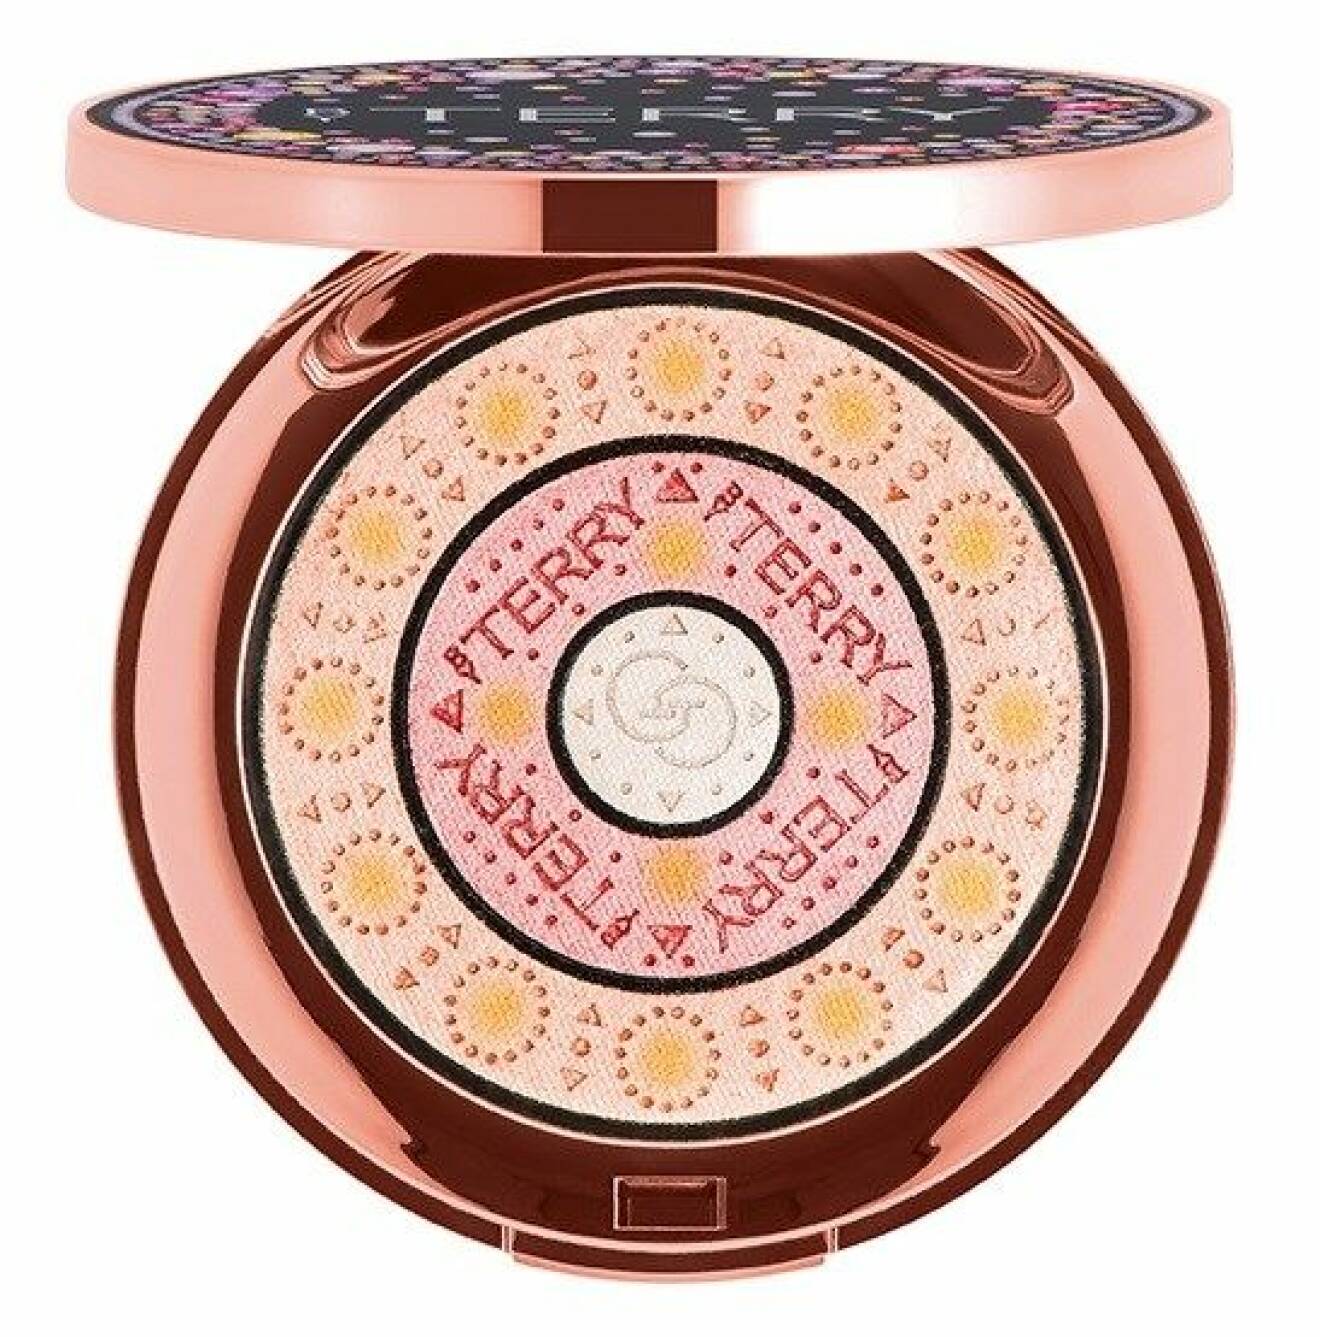 Gem glow trio compact, By Terry.